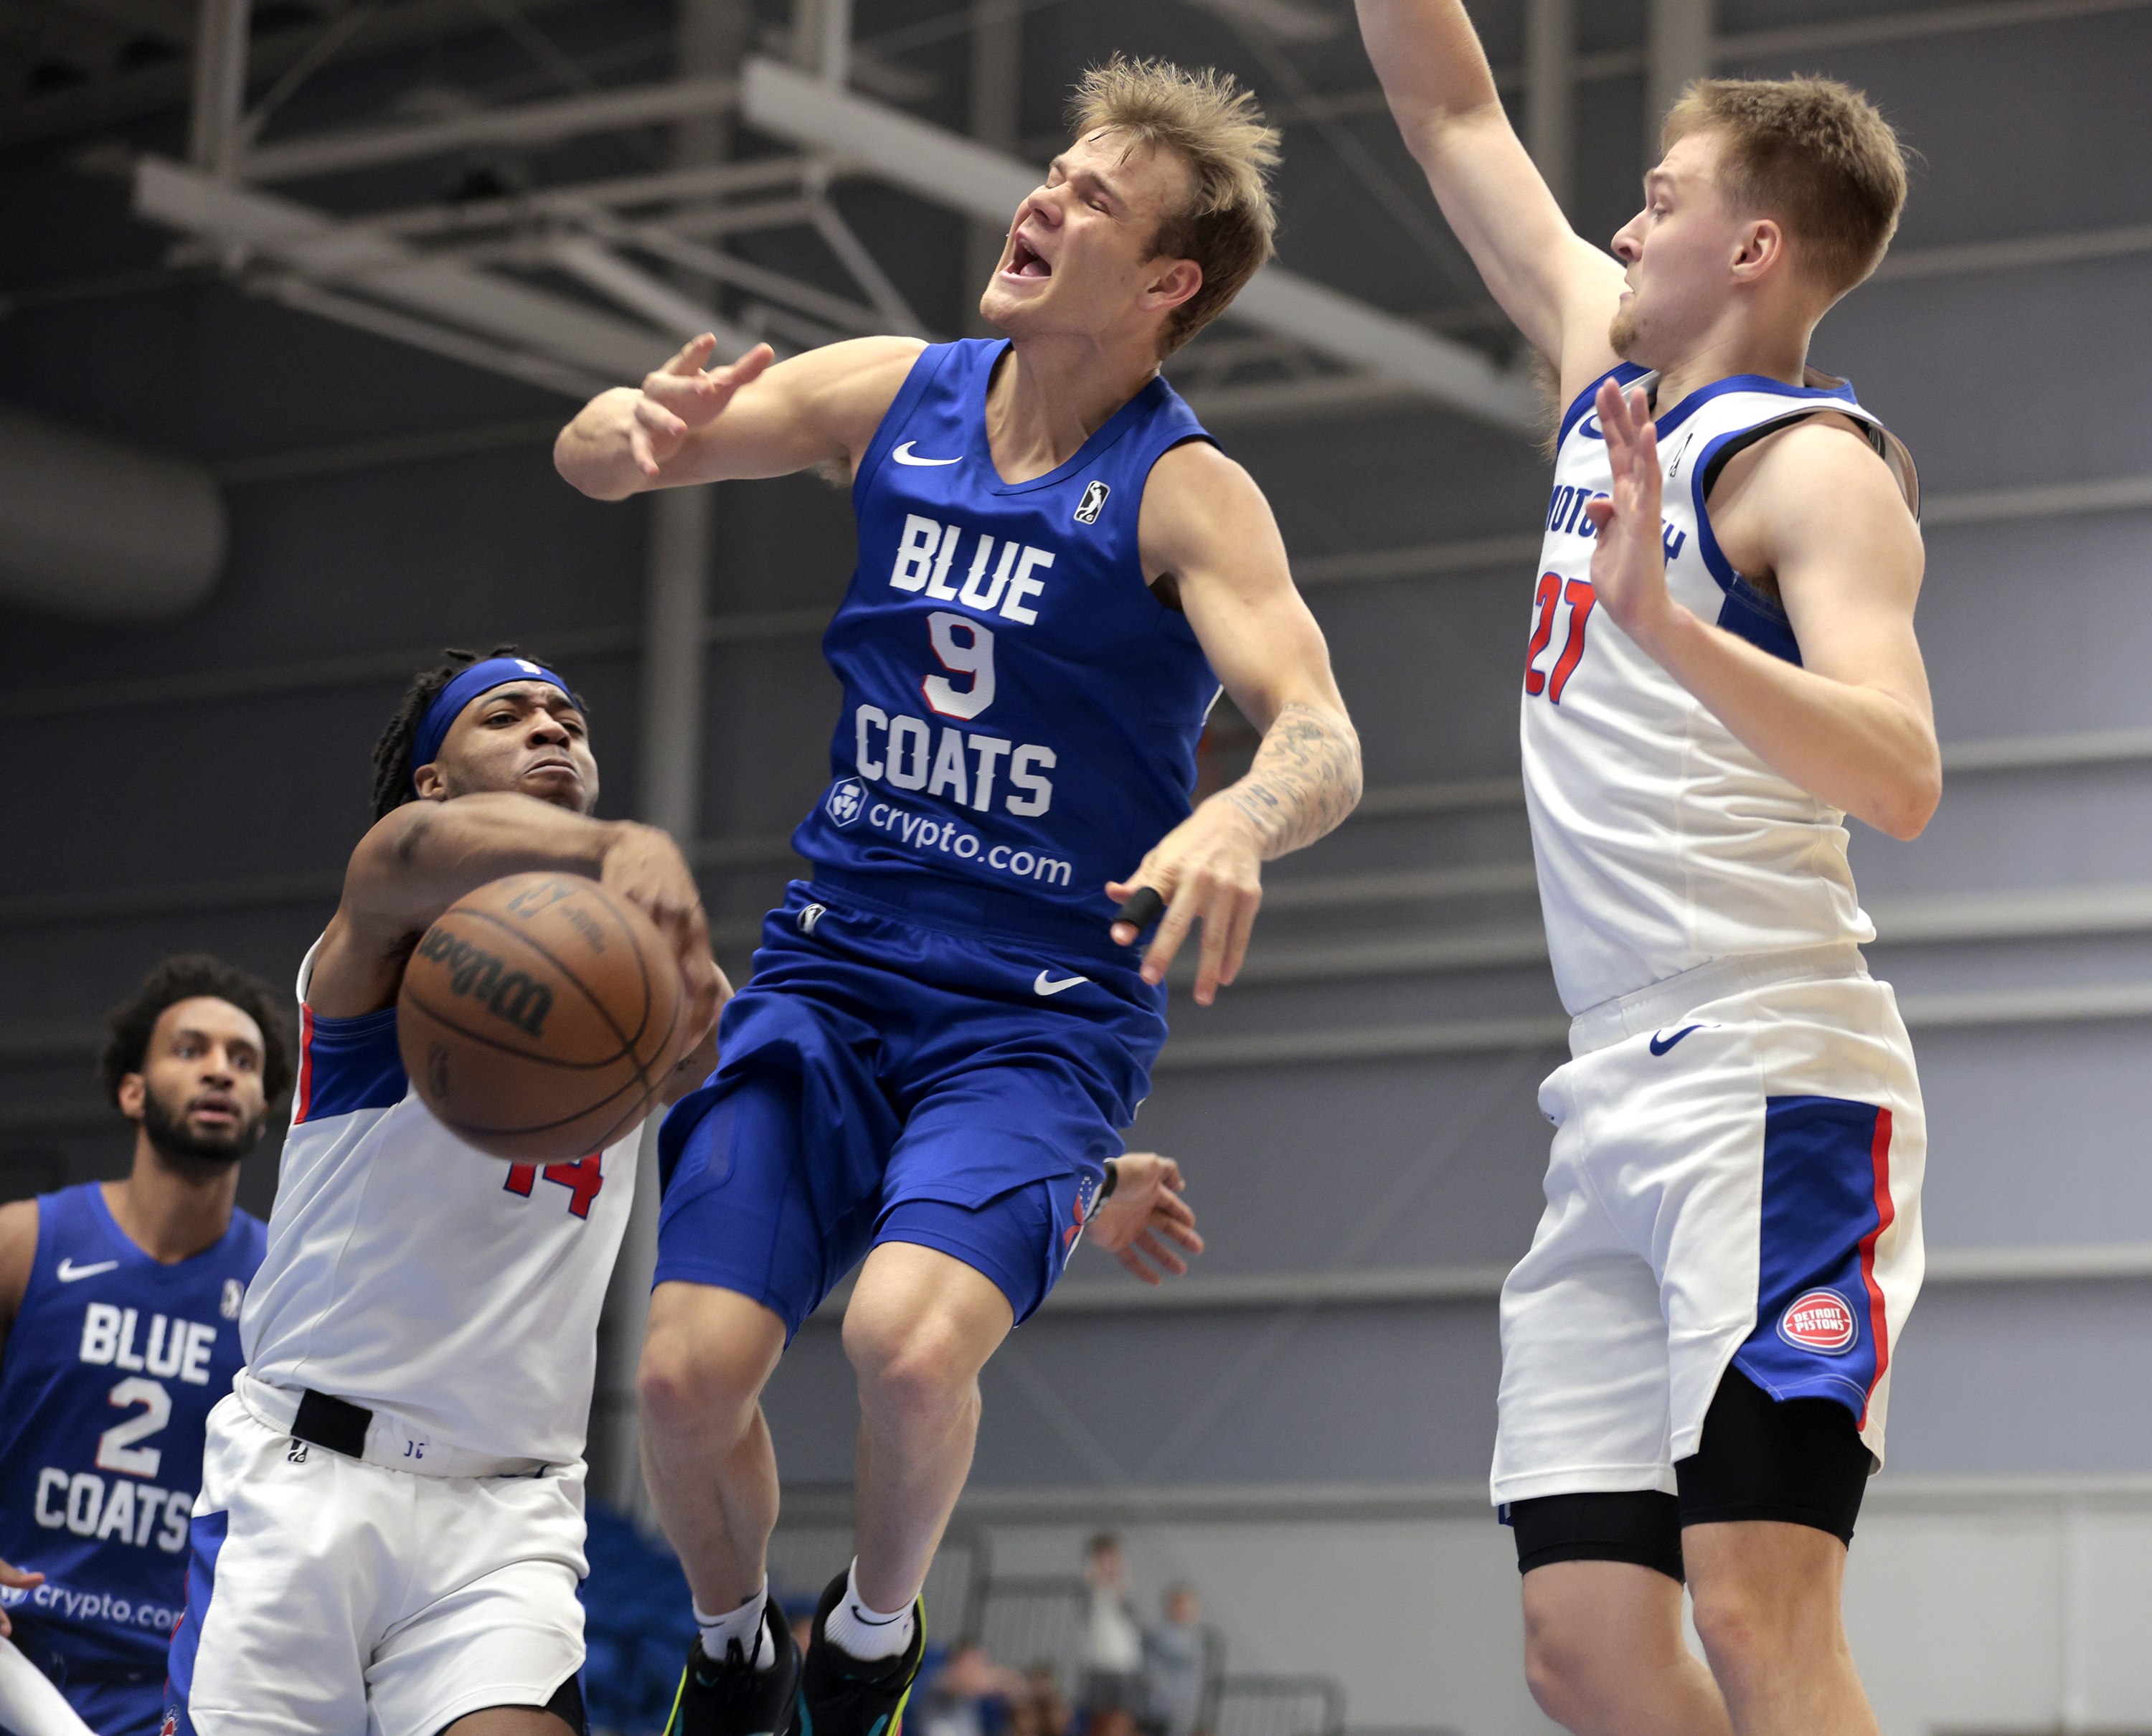 Sixers guard Mac McClung's slam-dunking rise to celebrity shows  basketball's evolution